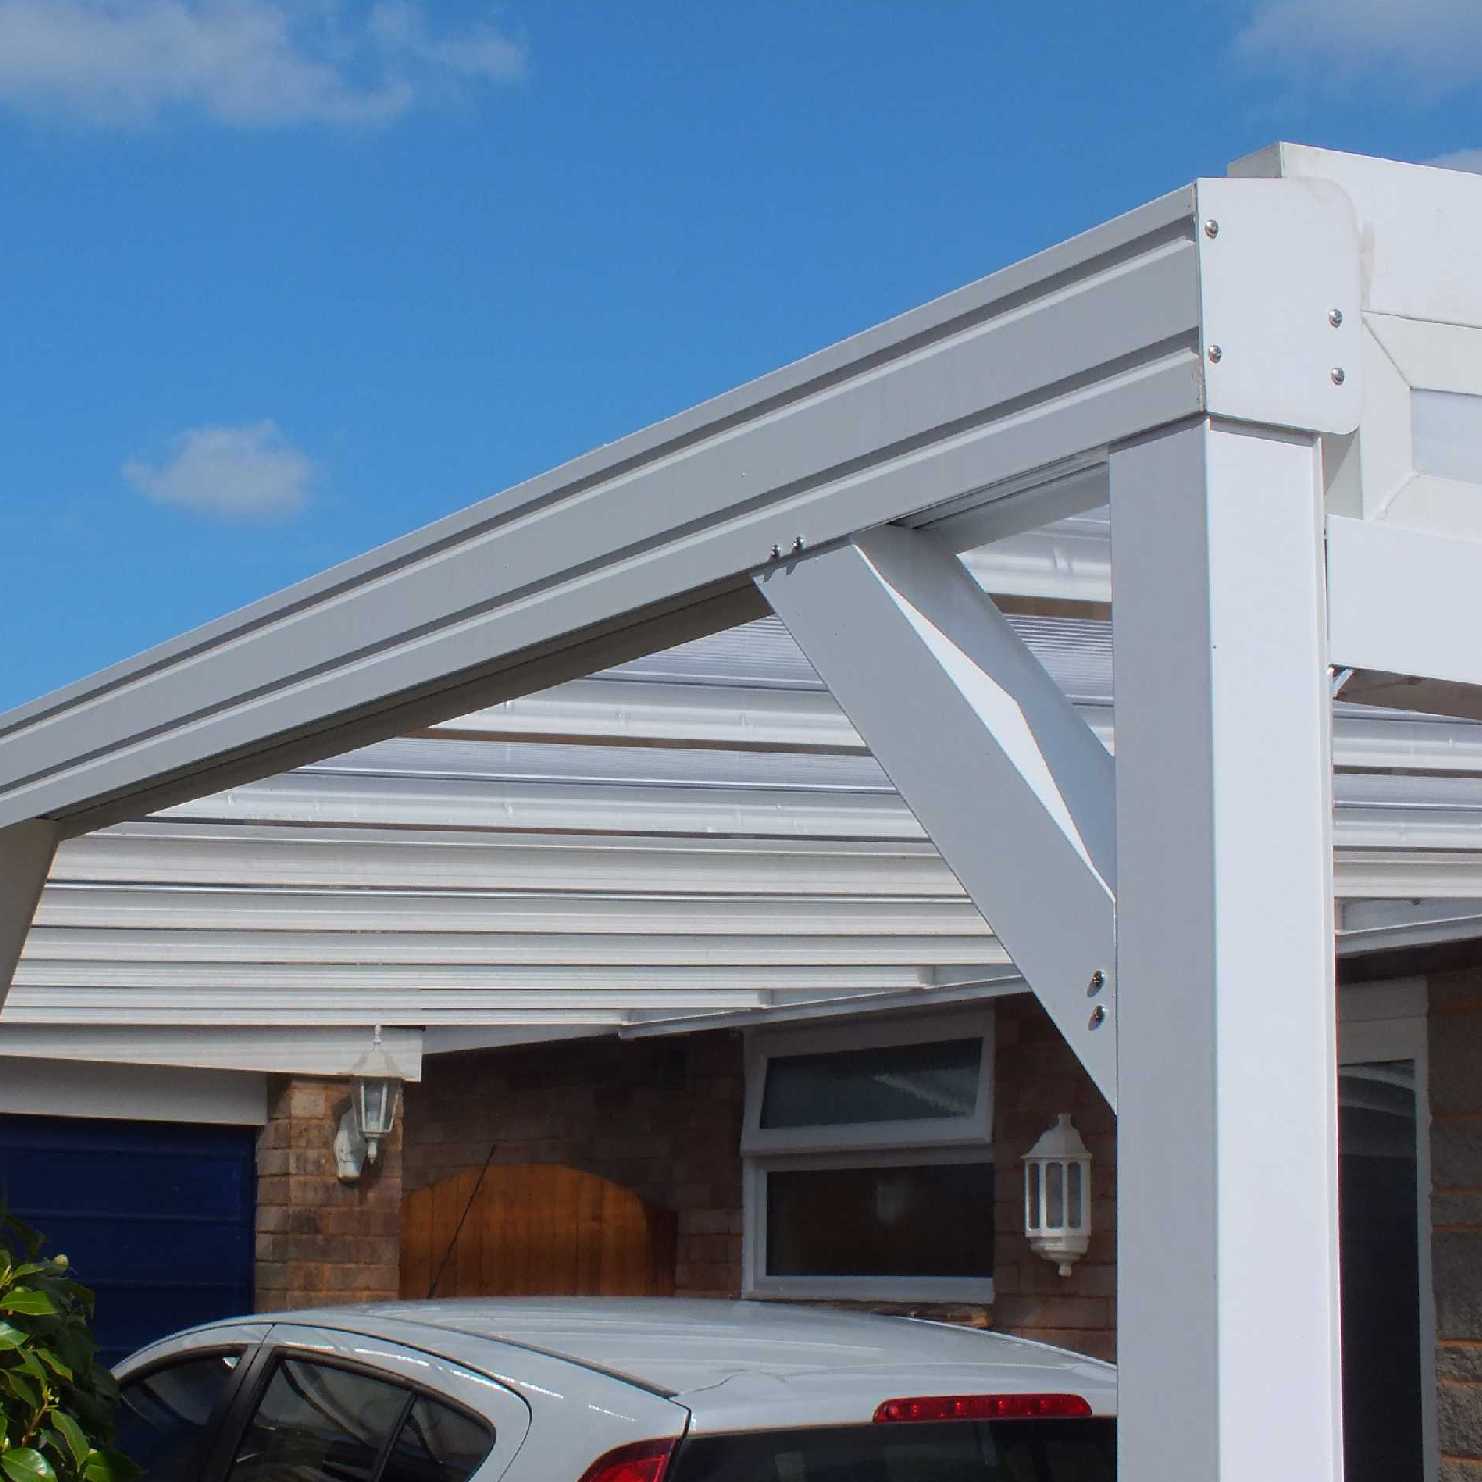 Buy Omega Smart Lean-To Canopy, White with 16mm Polycarbonate Glazing - 8.4m (W) x 4.0m (P), (4) Supporting Posts online today